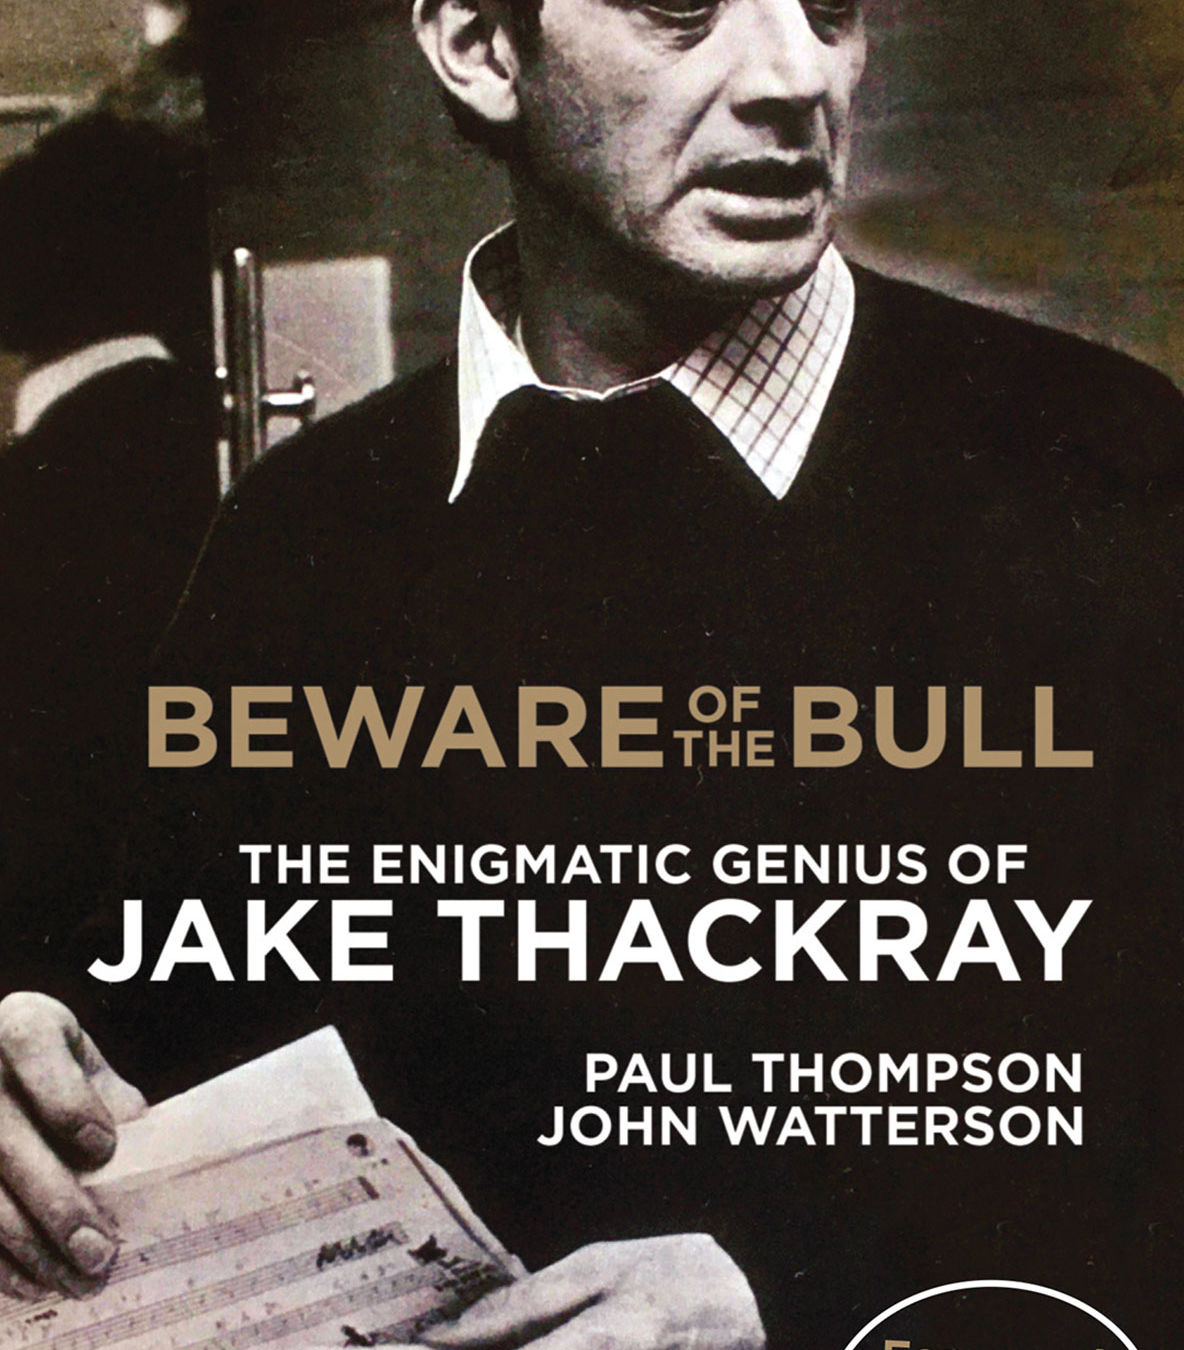 Book jacket for Beware Of The Bull: The Enigmatic Genius of Jake Thackray by author Paul Thompson